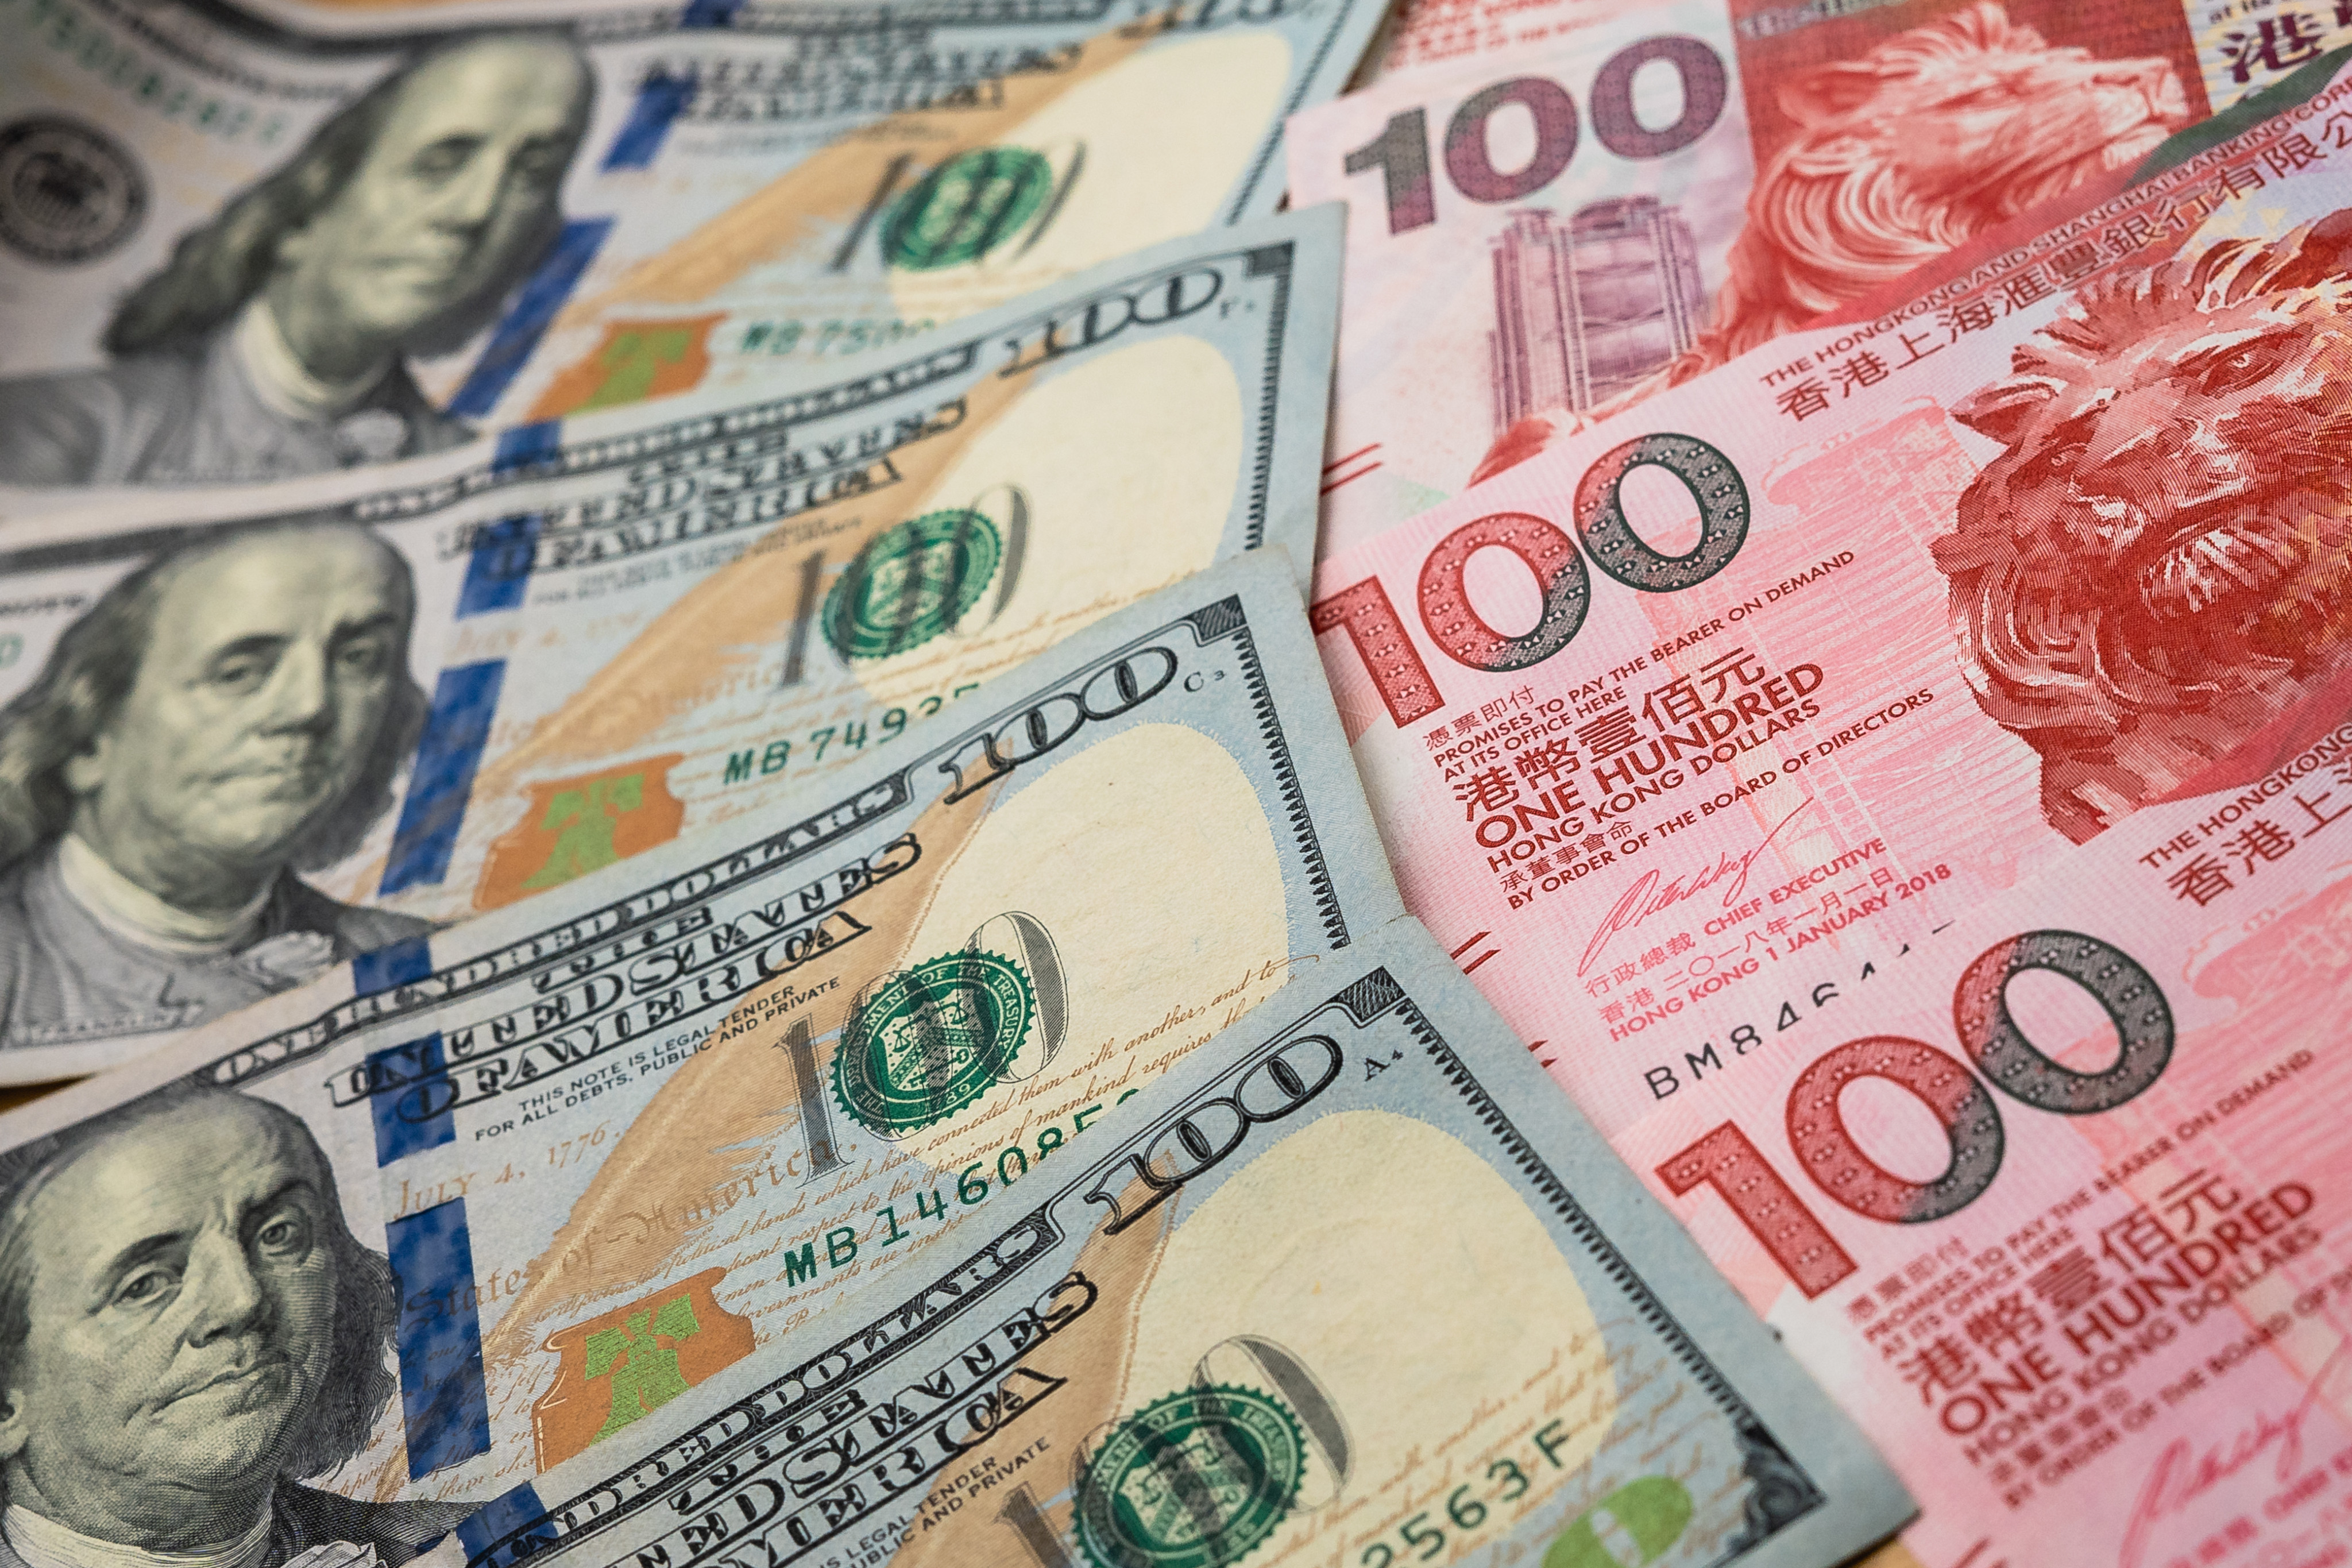 Given that the US dollar has been more stable than the yuan, it’s not convincing why sticking with a US-pegged currency means more exposure to volatility. Photo: Shutterstock